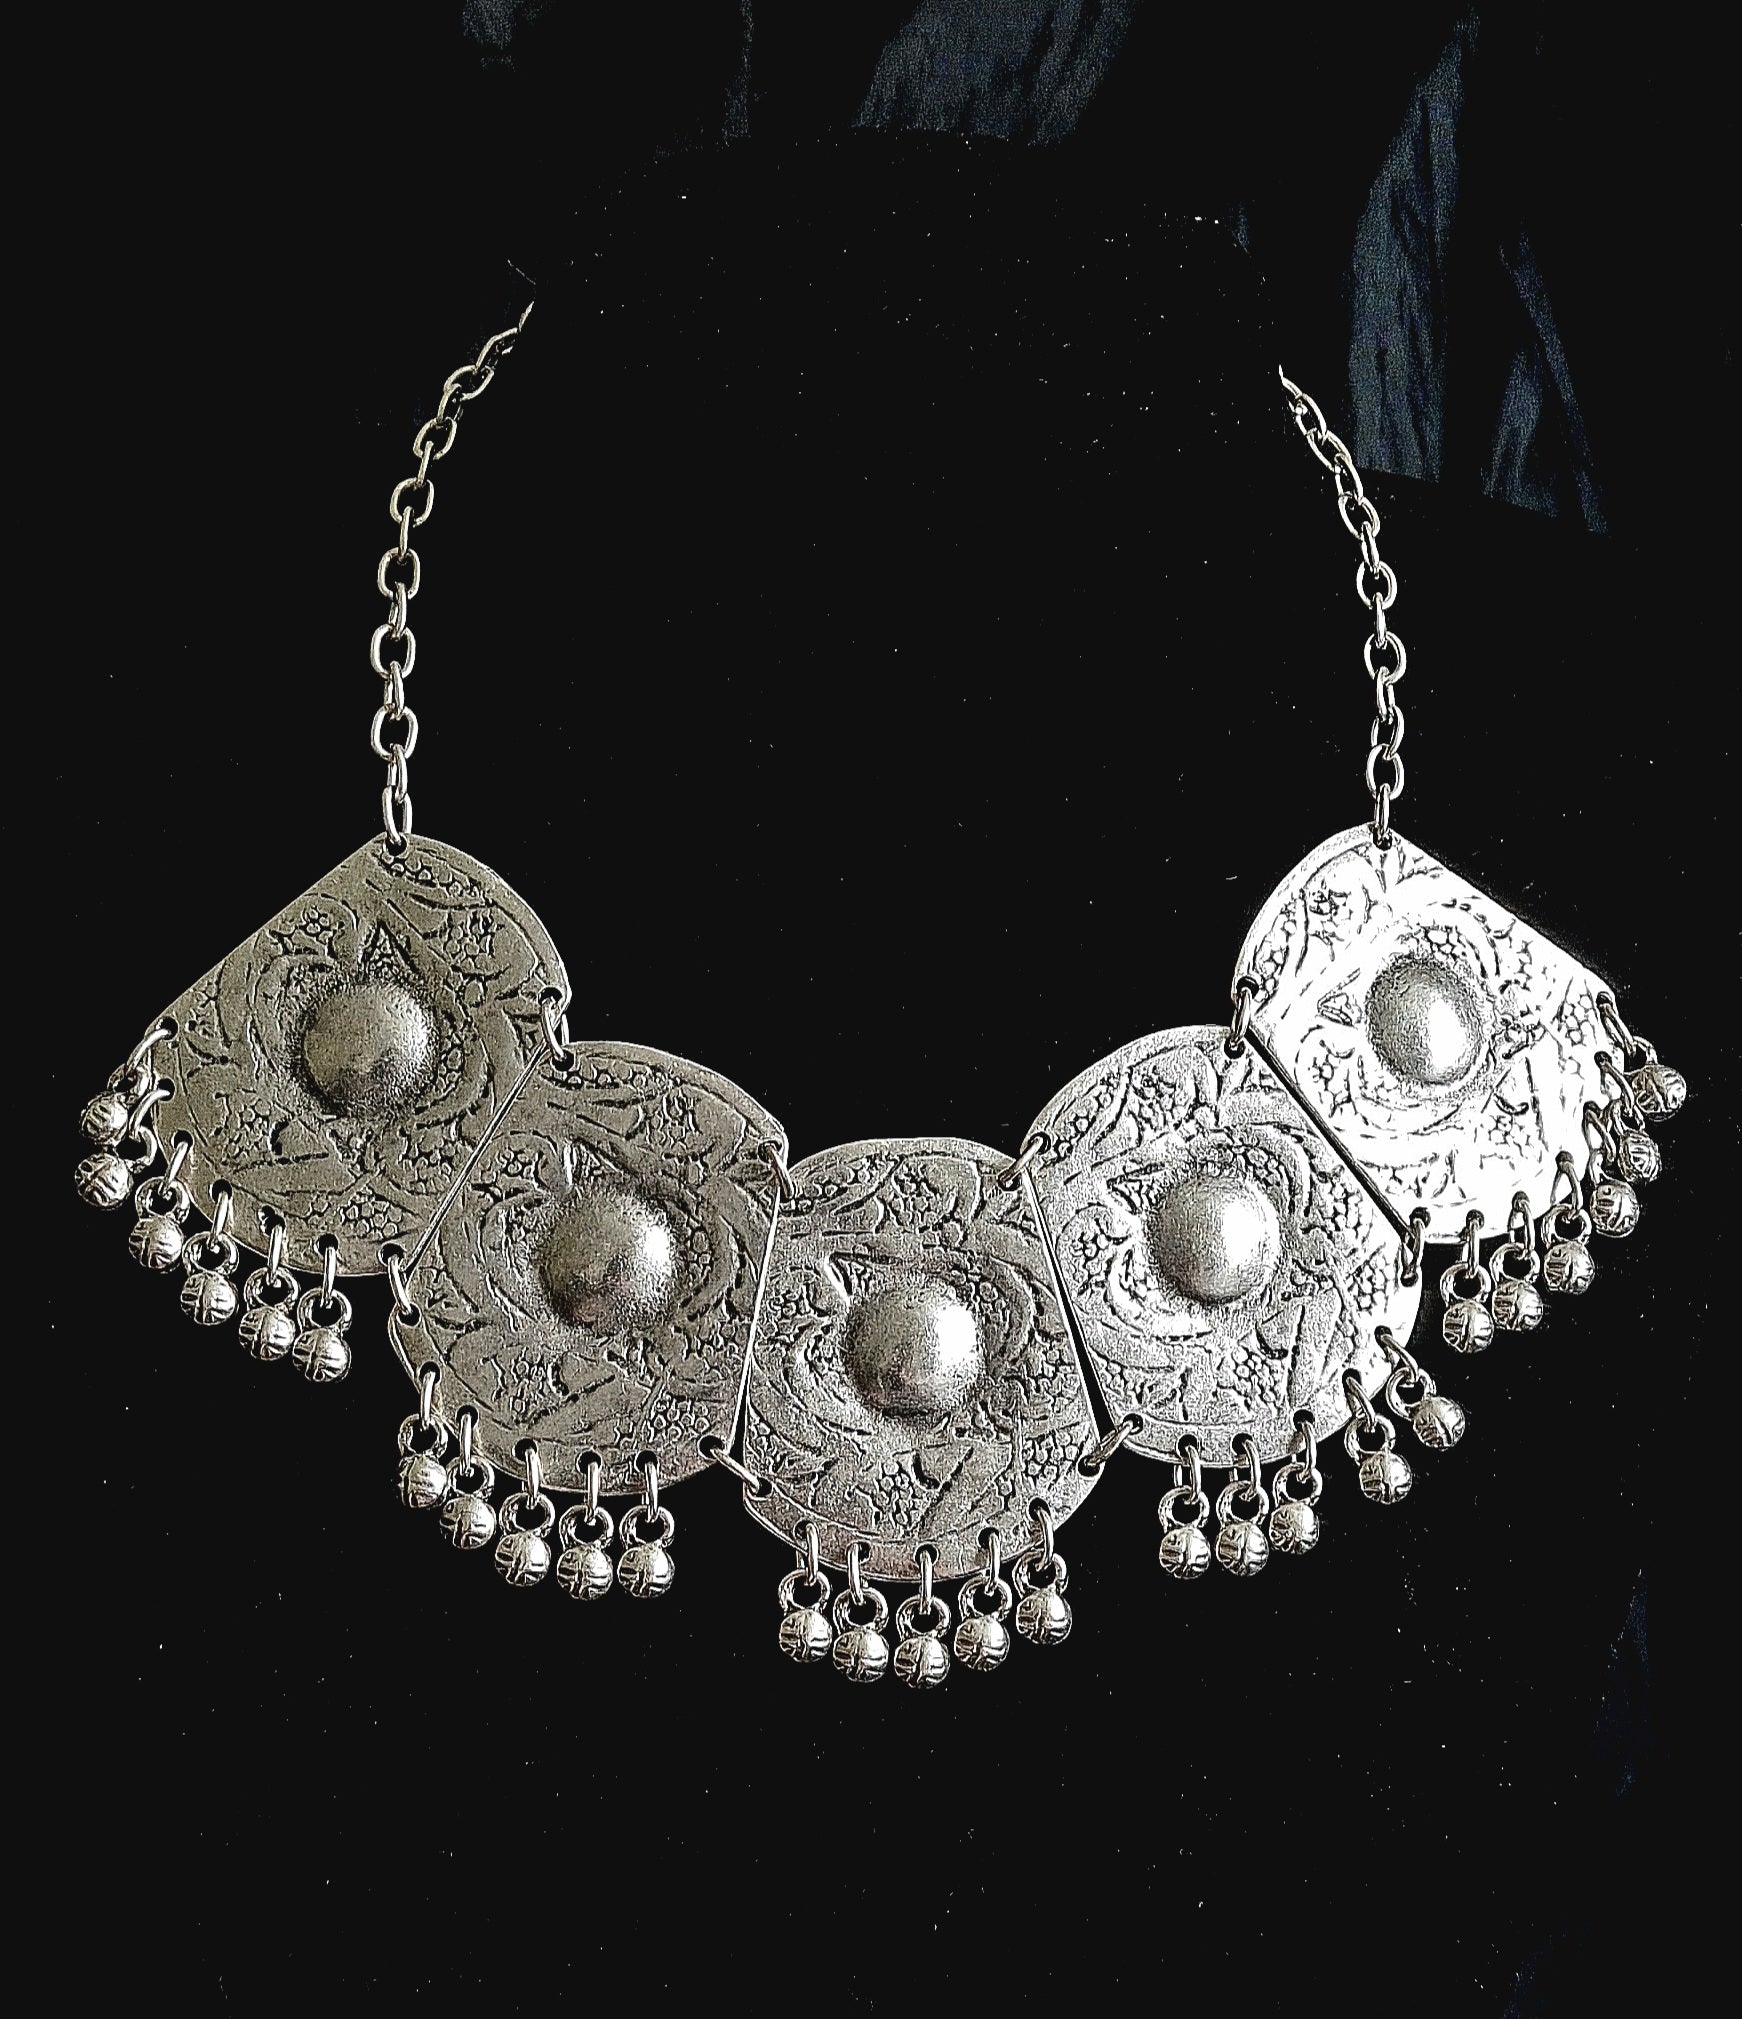 Dazzling silver filigree necklace, "Anastasia," features mesmerizing details,